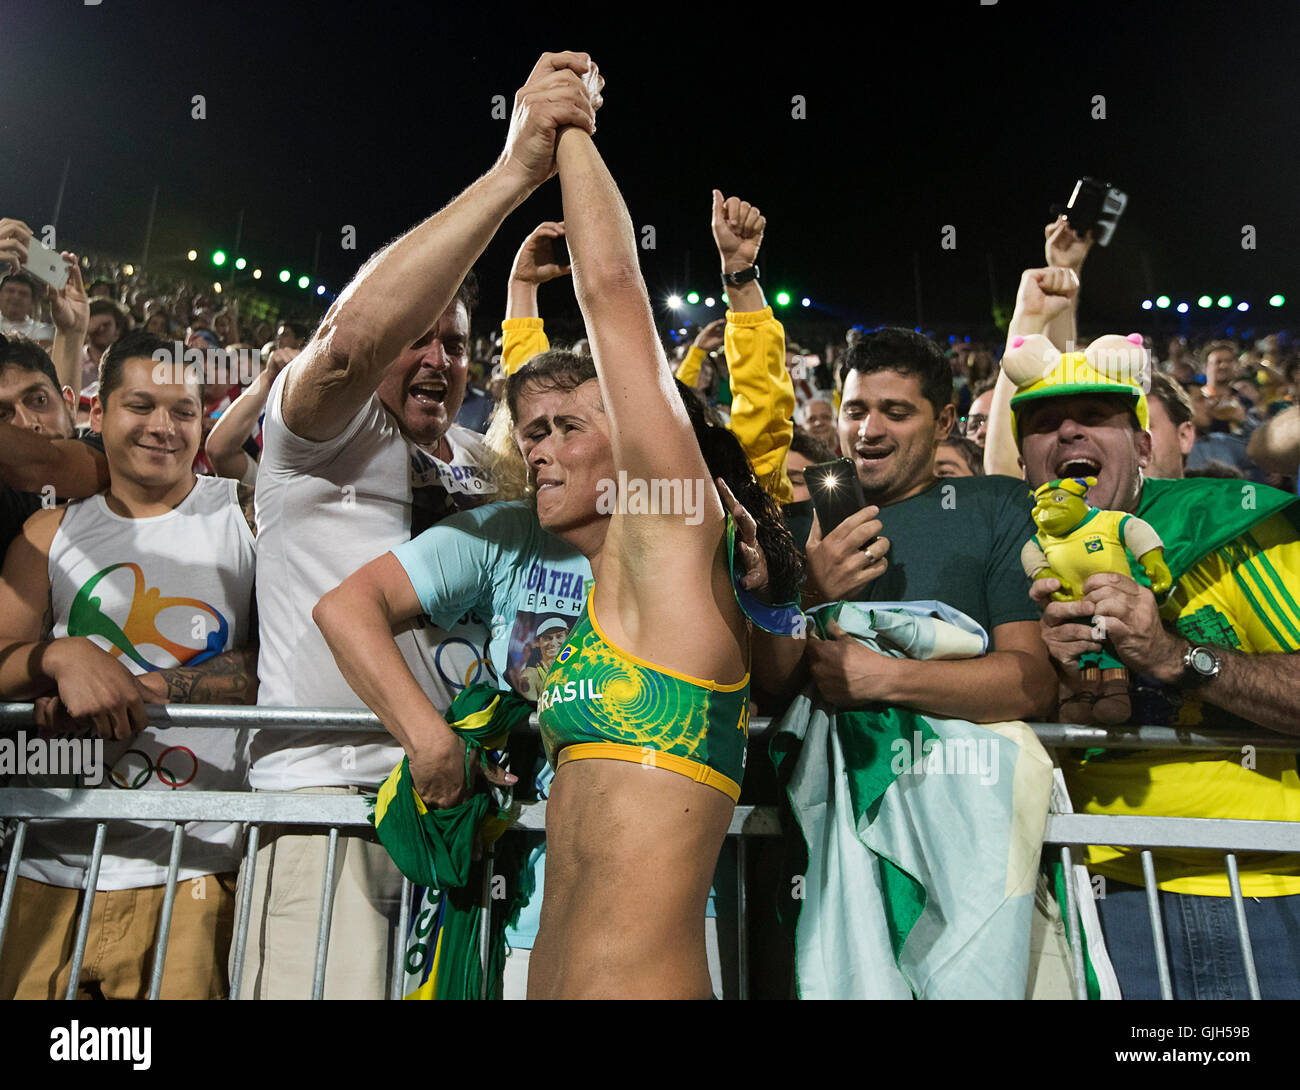 Rio de Janeiro, RJ, Brazil. 17th Aug, 2016. OLYMPICS BEACH VOLLEYBALL :Agatha Rippel Bednarczuk (BRA) celebrates with supporters after beating Kerri Walsh Jennings (USA) and April Ross (USA) in the semifinals at Beach Volleyball Arena during the 2016 Rio Summer Olympics games. Credit:  Paul Kitagaki Jr./ZUMA Wire/Alamy Live News Stock Photo